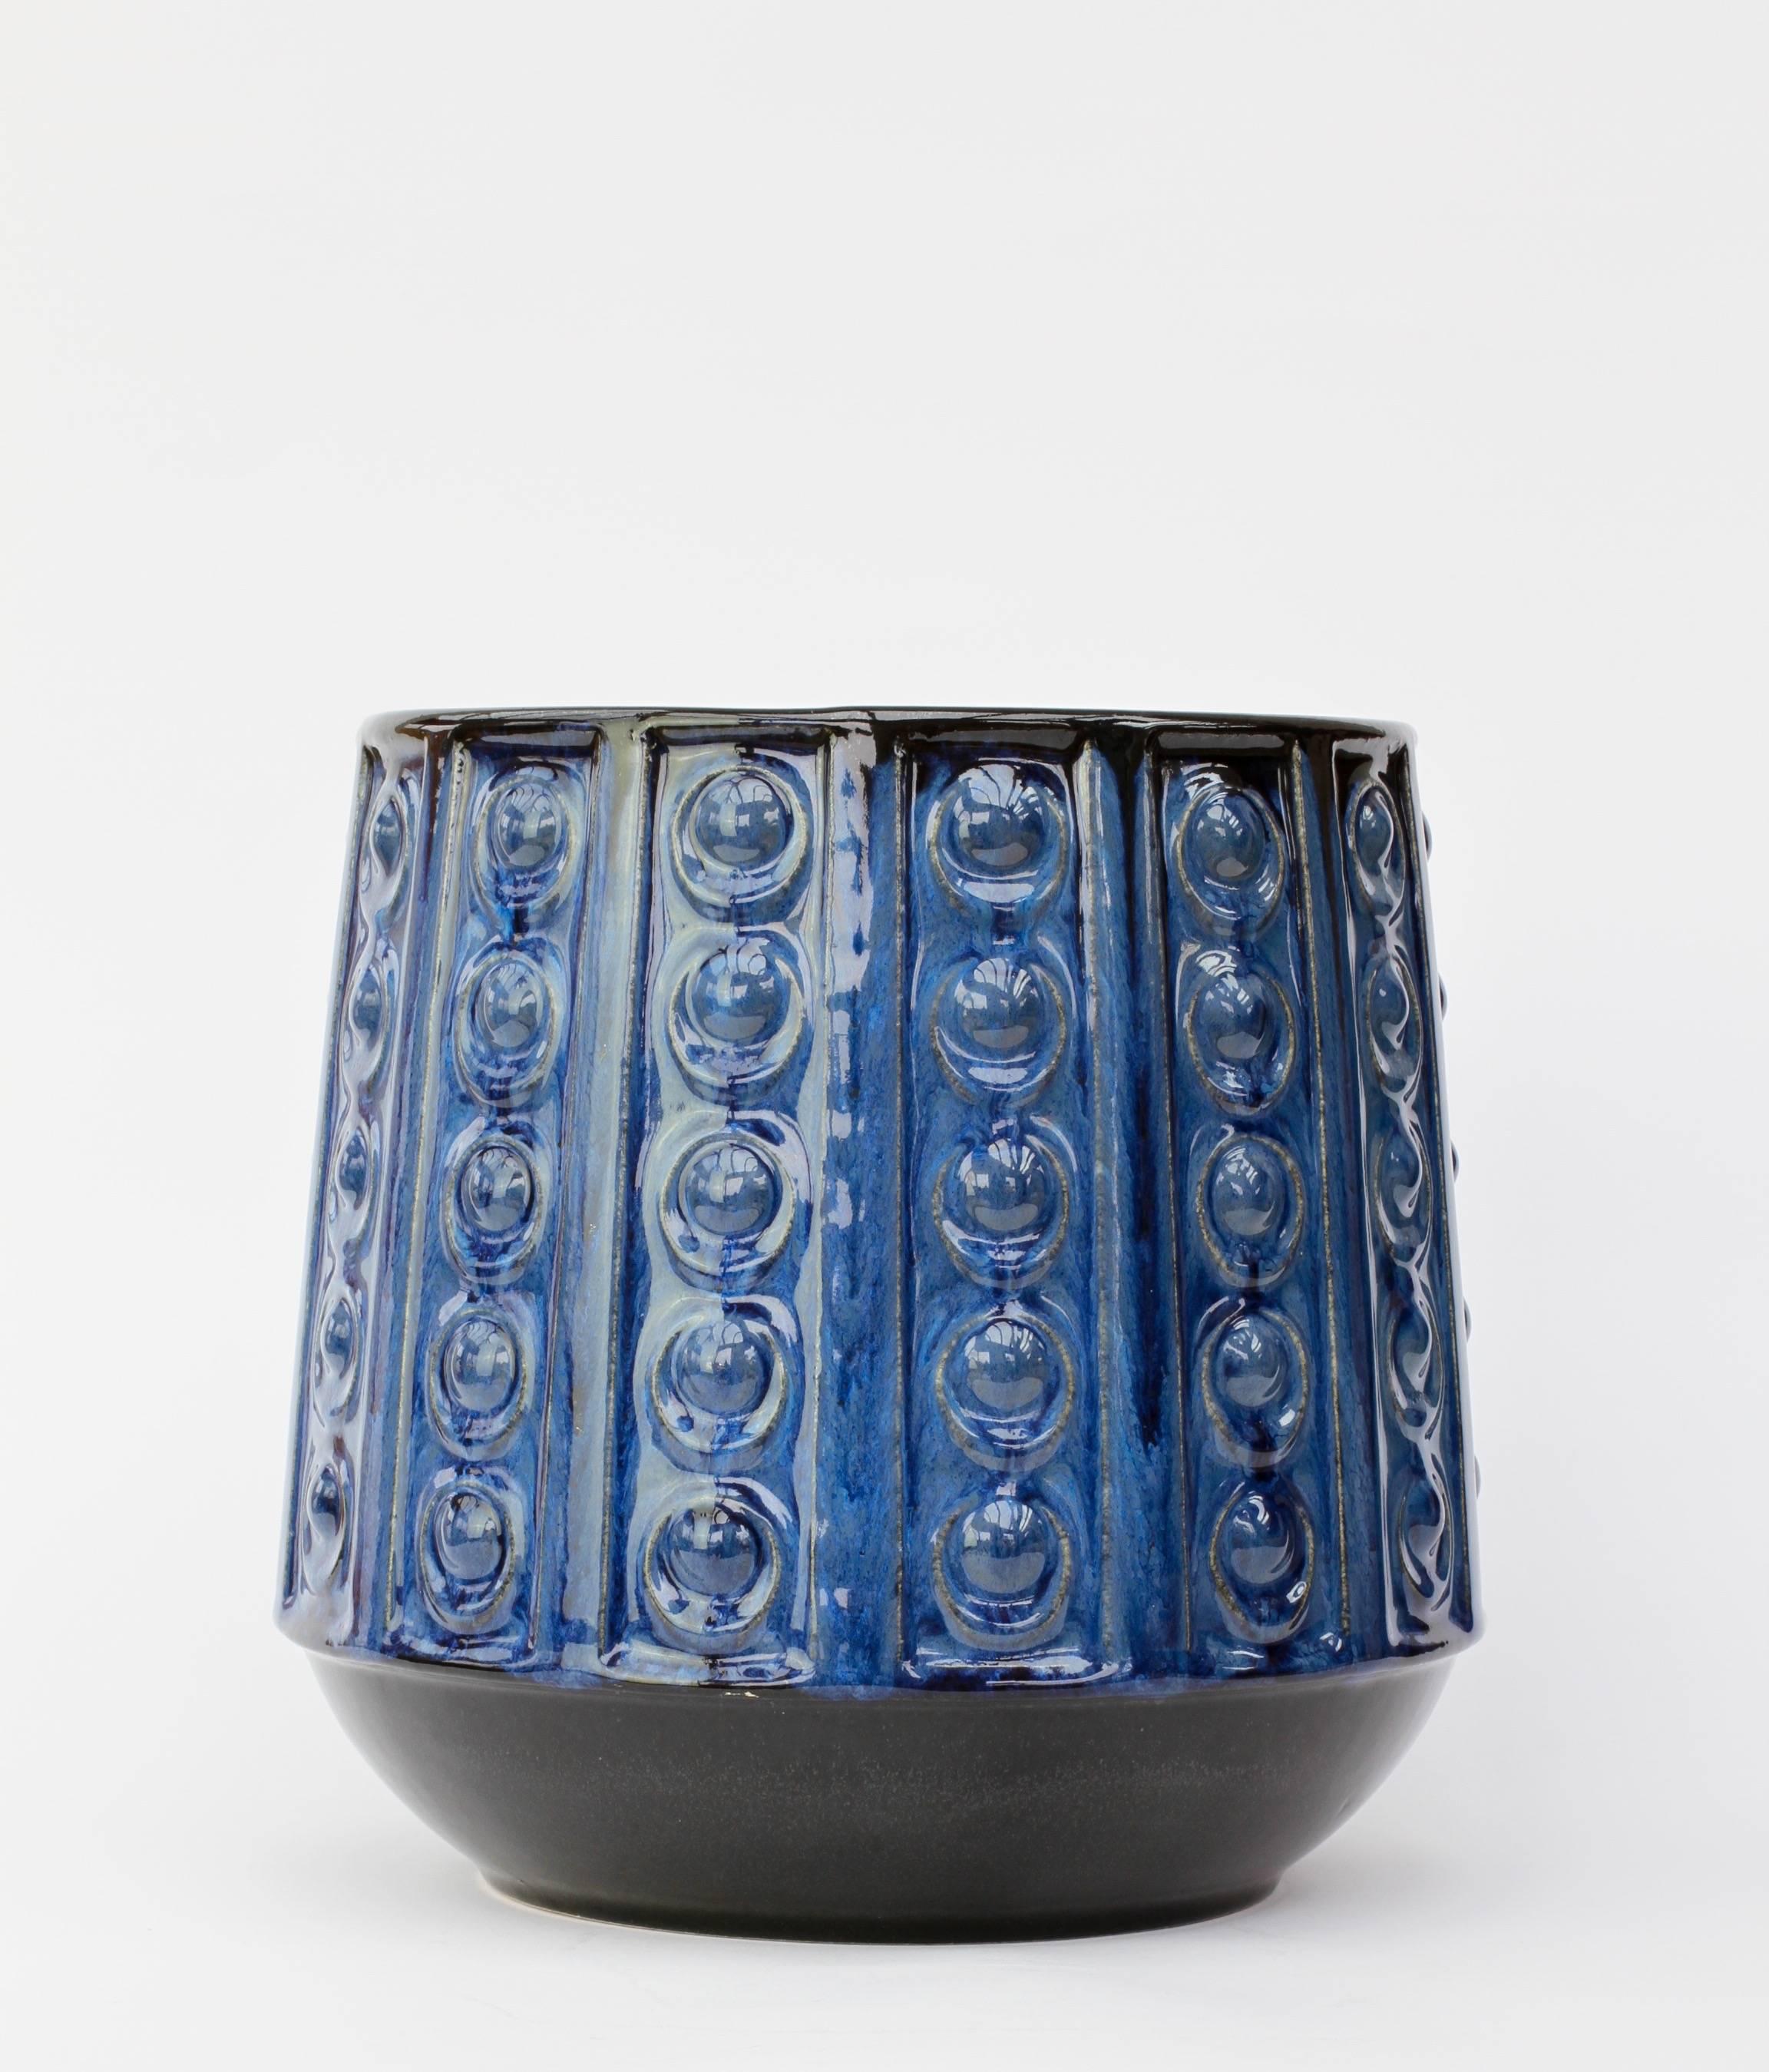 A beautiful, large plant pot or flower vase in striking blue over dark, almost black, brown glaze with an embossed pattern - shape number 4121-20, produced by Jasba Pottery in the mid-1970s.

This vase makes a fantastic, striking statement when